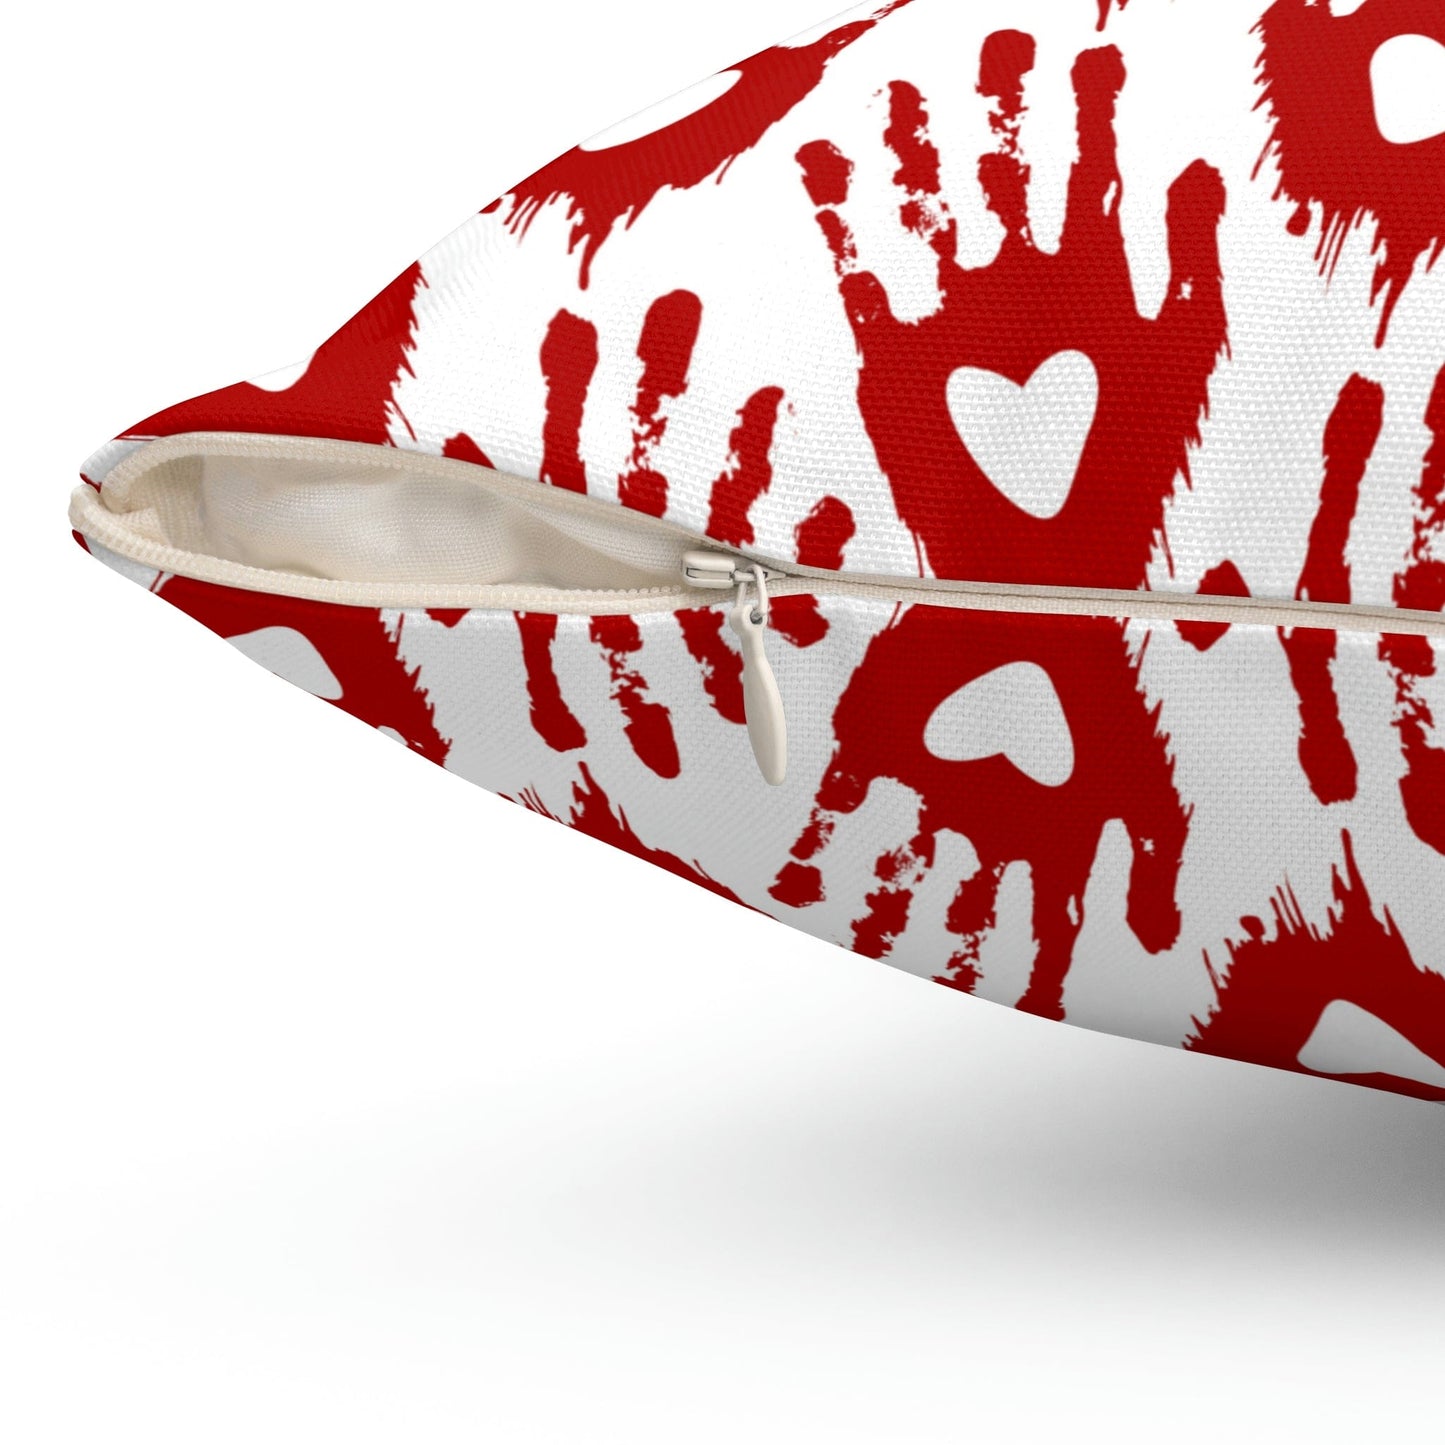 Kate McEnroe New York Halloween Pillow Case - Red Heart Hand Pattern Throw Pillow Covers